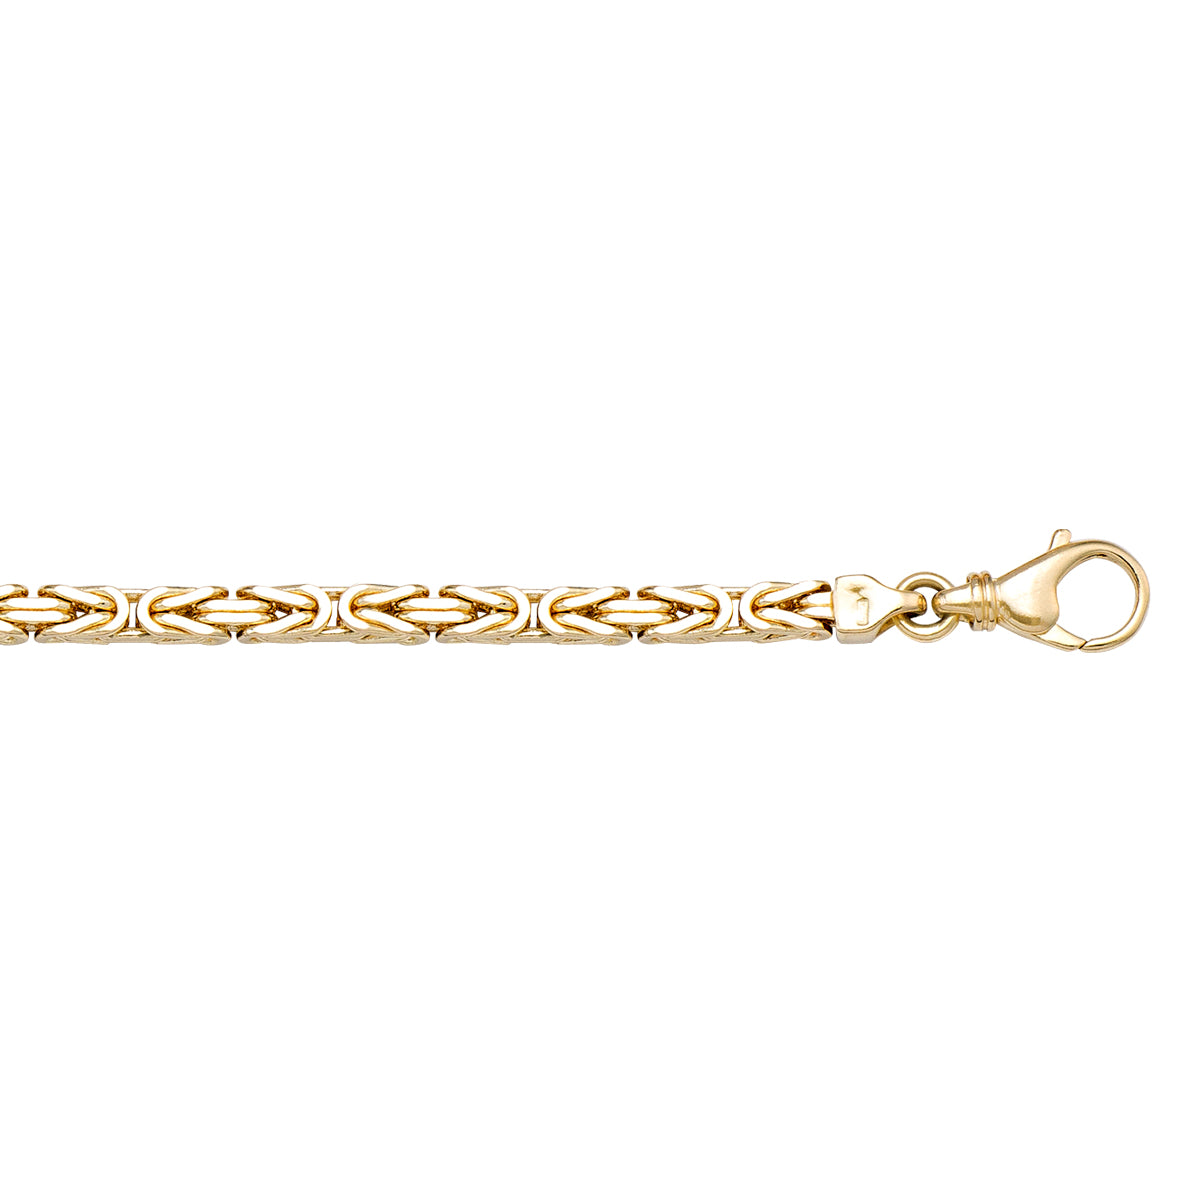 BRACELETS YELLOW GOLD SOLID BYZANTINE LINK CHAIN